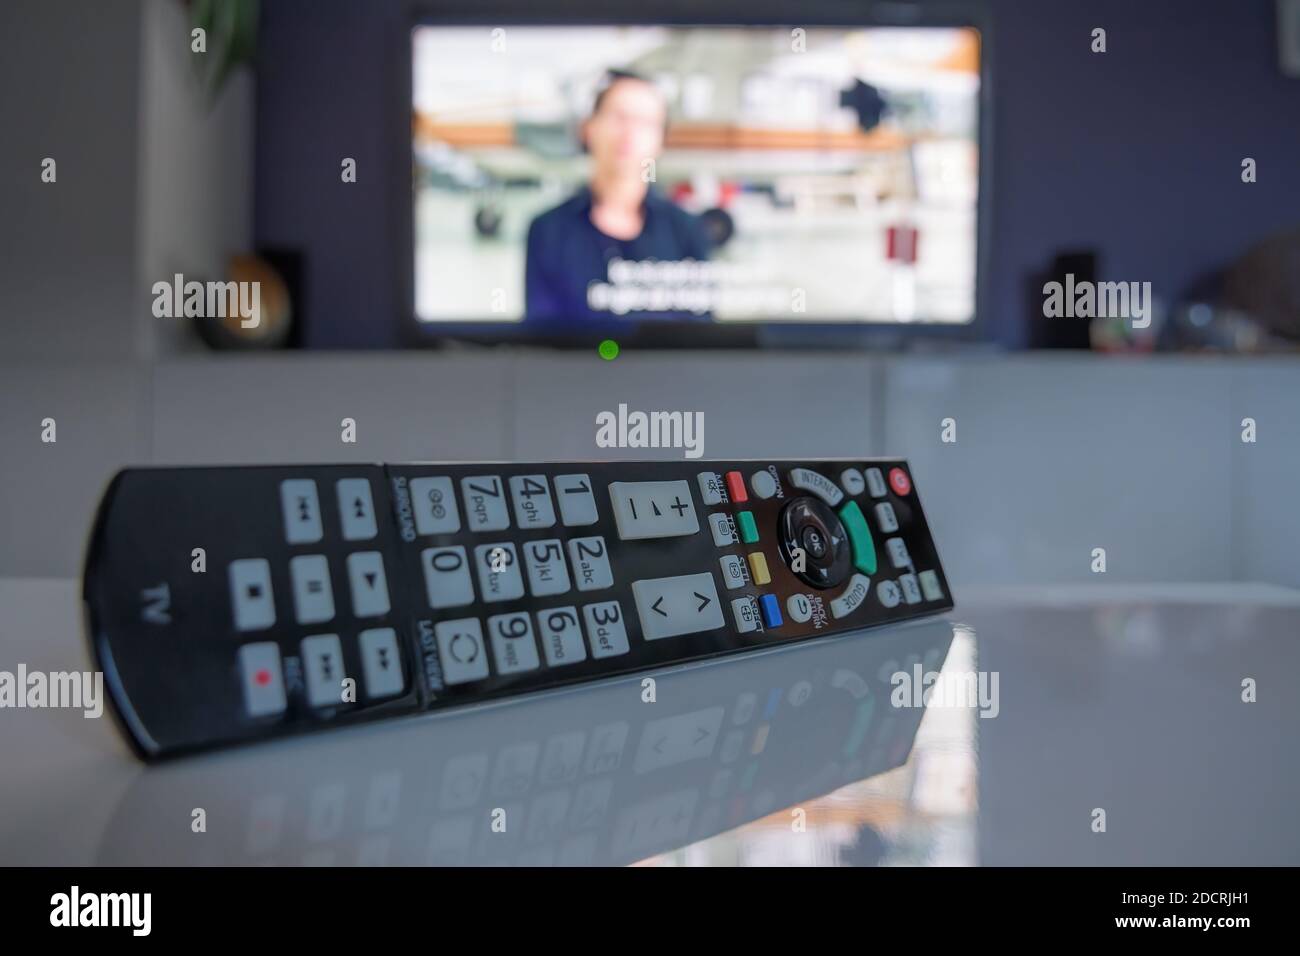 Close-up of TV remote controller on coffee table in front of smart television set. Television, technology, news and entertainment concepts Stock Photo